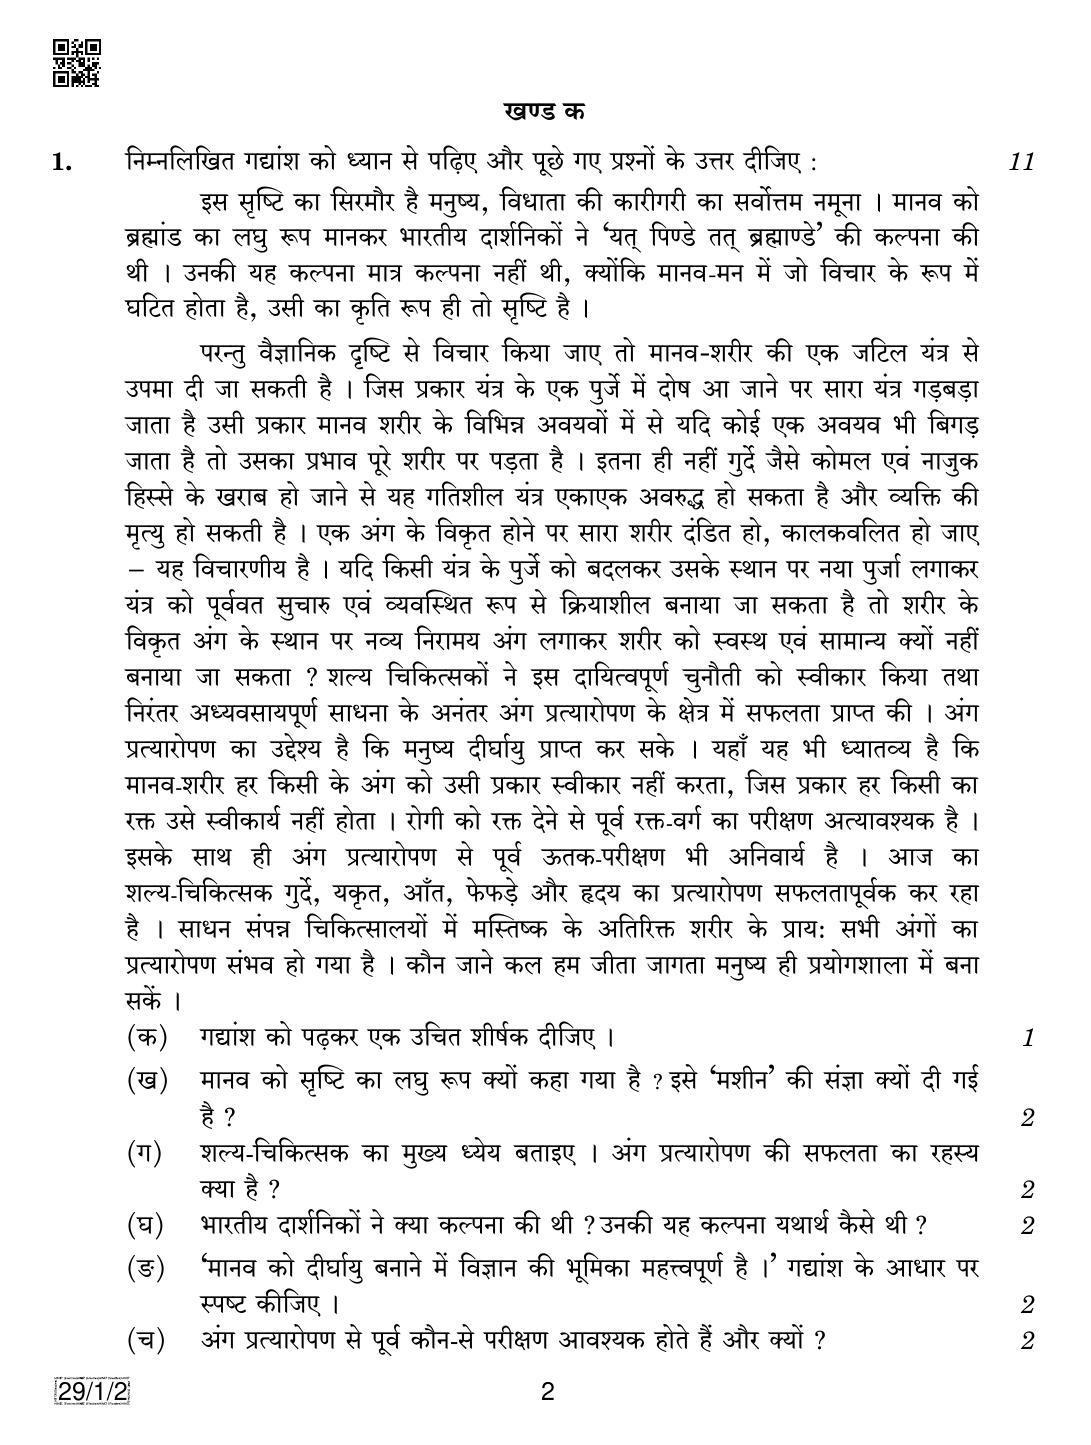 CBSE Class 12 29-1-2 HINDI ELECTIVE 2019 Compartment Question Paper - Page 2